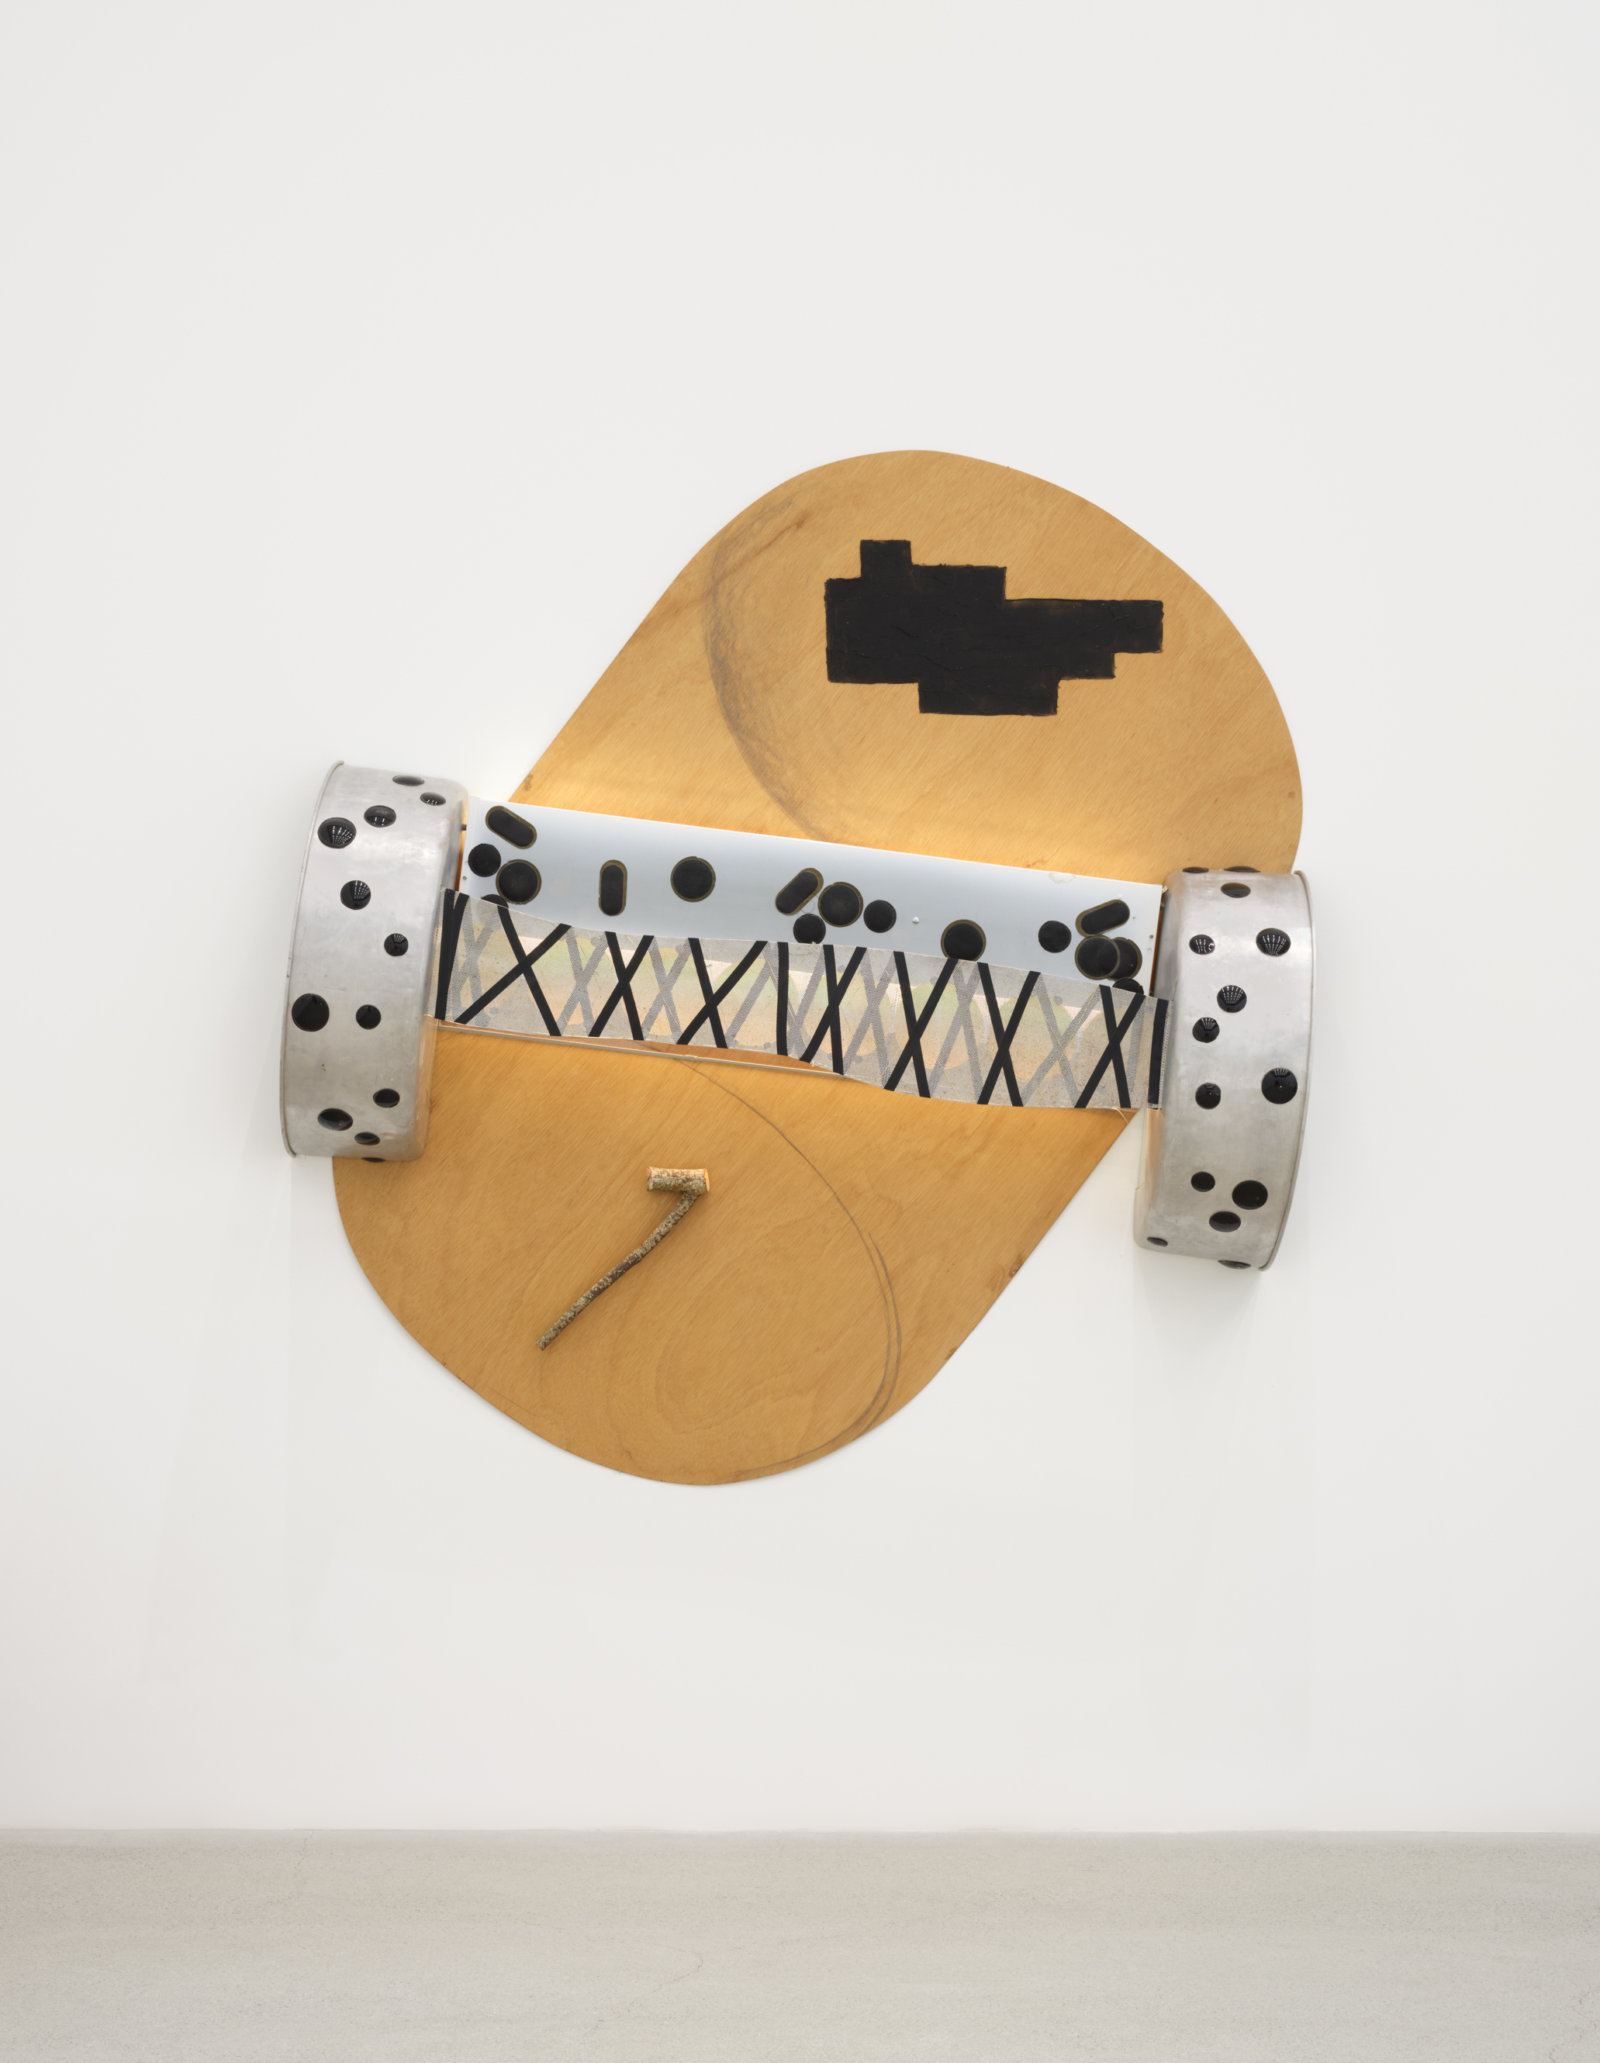 Jerry Pethick, Before The End, 1995, photo array, plywood, aluminum, wood, silicone, watch glasses, Fresnel lenses, glass, fluorescent fixture, butyrate, 74 1/4 x 68 x 14 in. (189 x 173 x 36 cm)